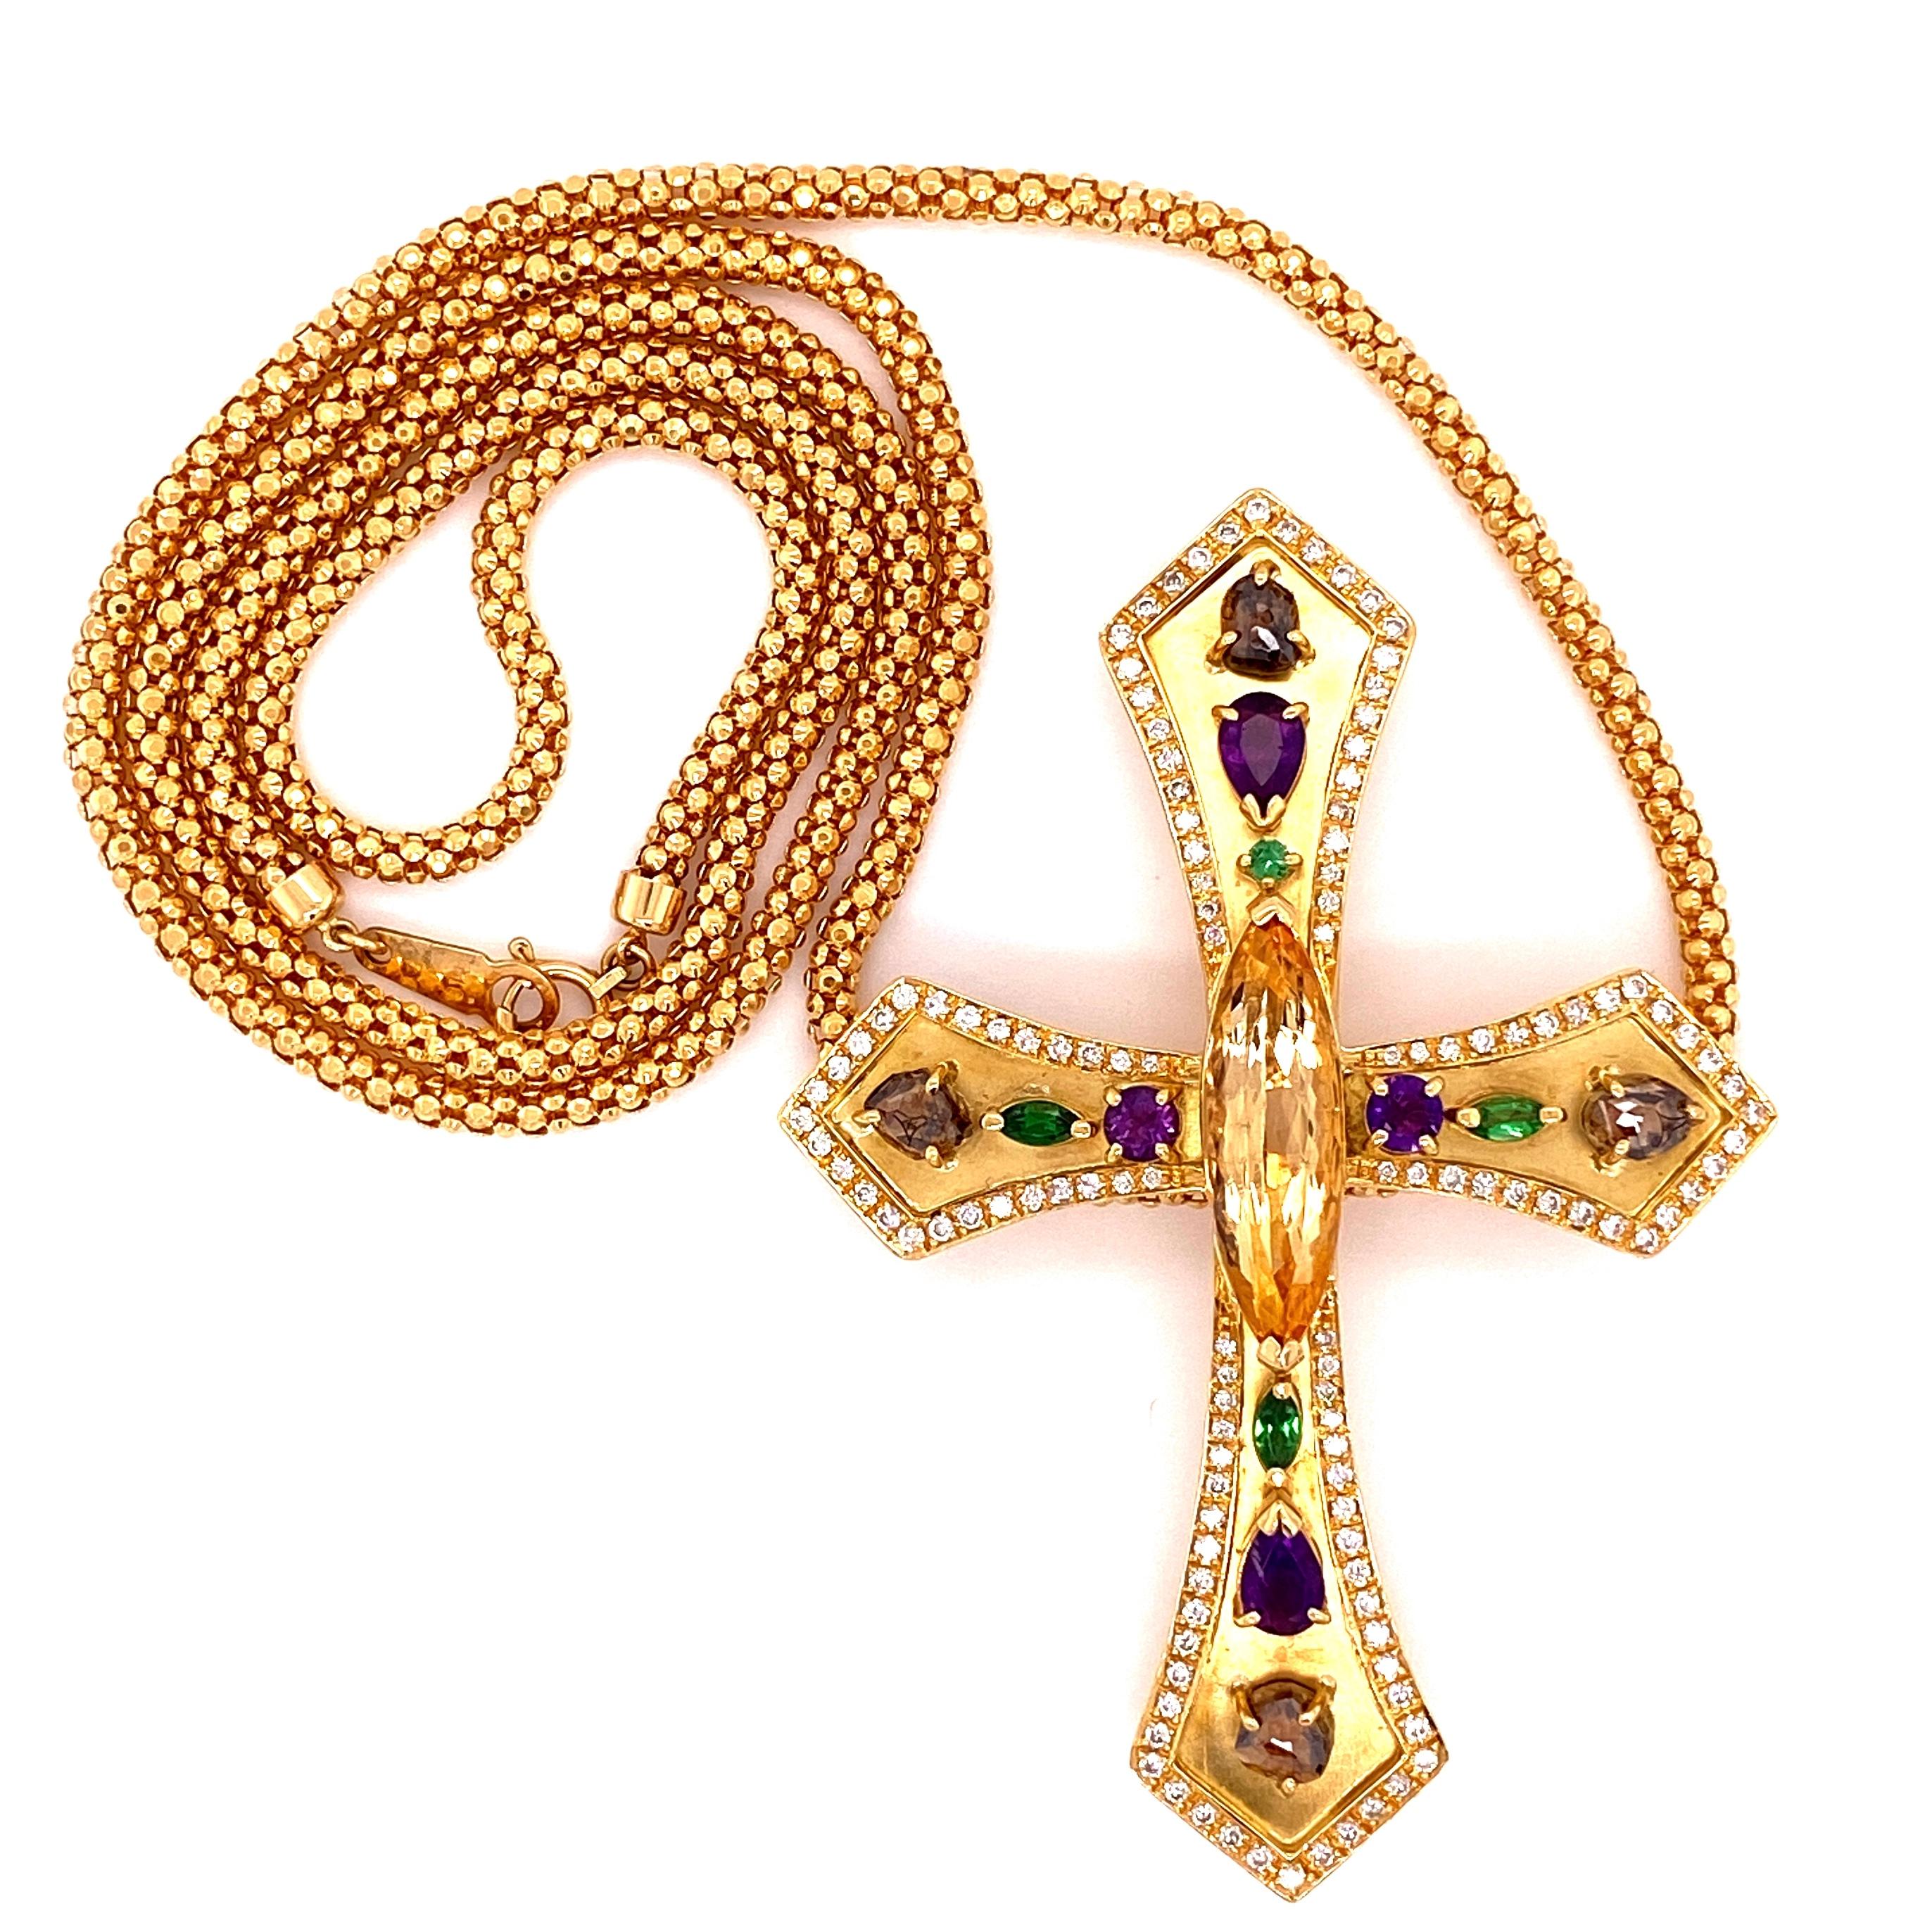 Beautiful Finely Detailed Gemstone and Diamond Gold Cross. Hand set with a 5.08 Carat Topaz in center, Gemstones and surrounded by Diamonds, approx. 0.95tcw. Hand crafted in 18K Yellow Gold. Suspended from an 18K Yellow Gold chain, approx. 24” long.